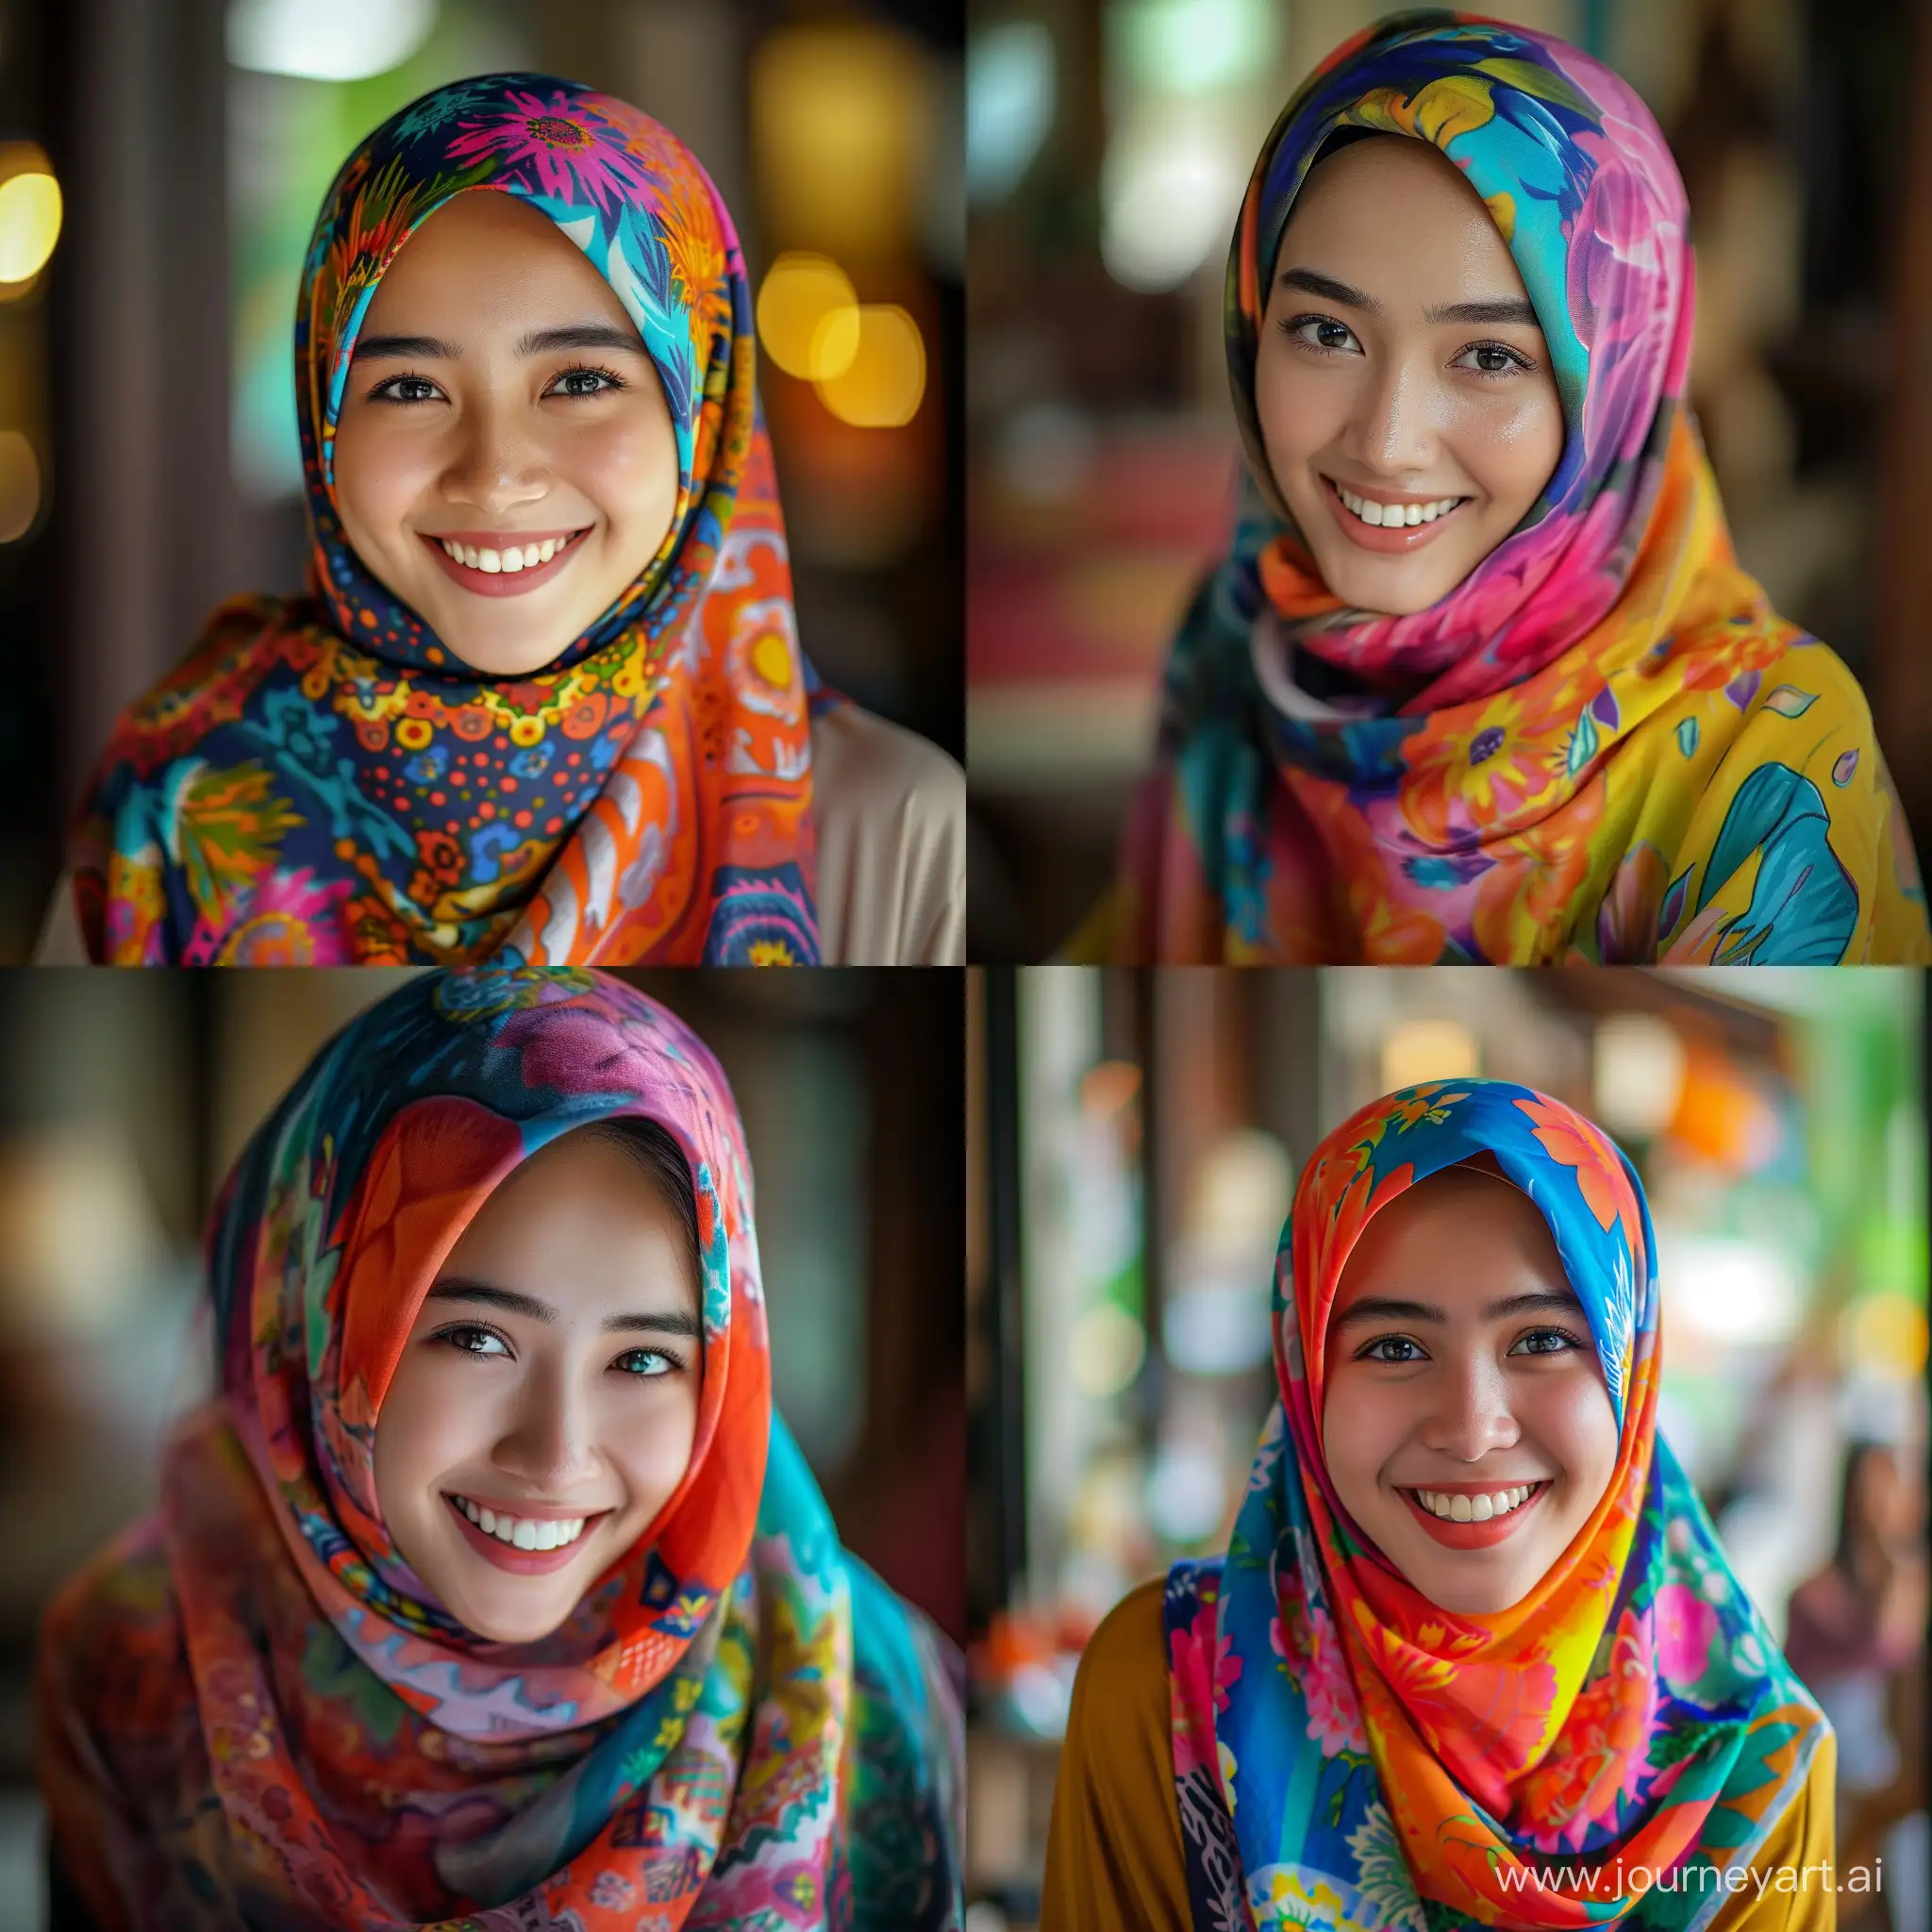 Smiling-Indonesian-Woman-in-Colorful-Hijab-HighDefinition-Portrait